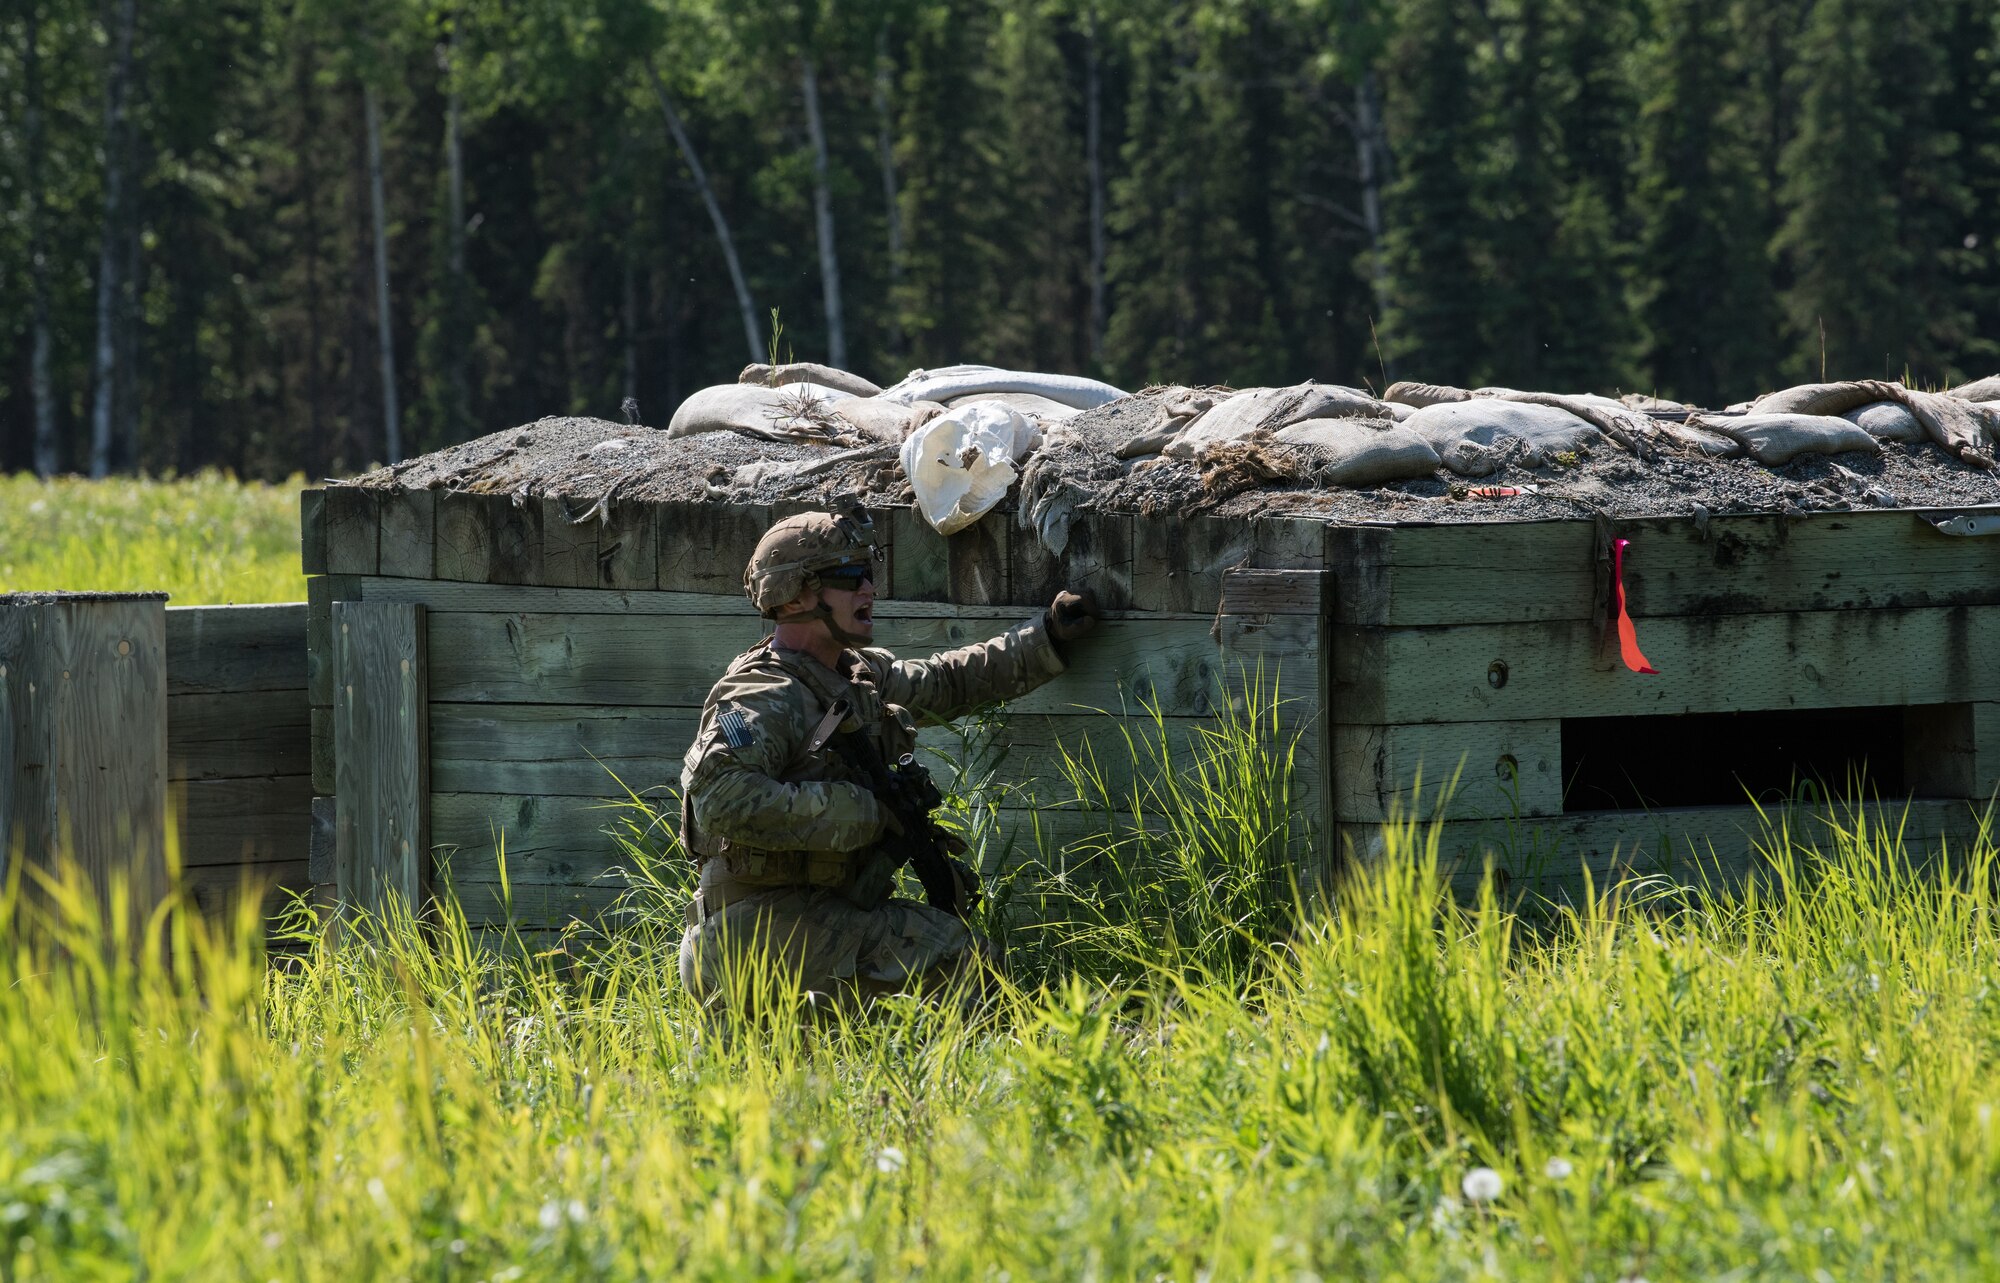 U.S. Army Alaska infantrymen from the 1st Stryker Brigade Combat Team, 25th Infantry Division, and Japan Ground Self-Defense Force soldiers from the 1st Airborne Brigade
execute platoon movement-to-contact and support-by-fire operations during Exercise Arctic Aurora at Joint Base Elmendorf-Richardson, Alaska, June 14, 2018. Arctic Aurora is an annual bilateral training exercise involving elements of U.S. Army Alaska and the JGSDF which focuses on strengthening ties between the two nations by executing combined small-unit airborne proficiency operations and basic small-arms marksmanship.